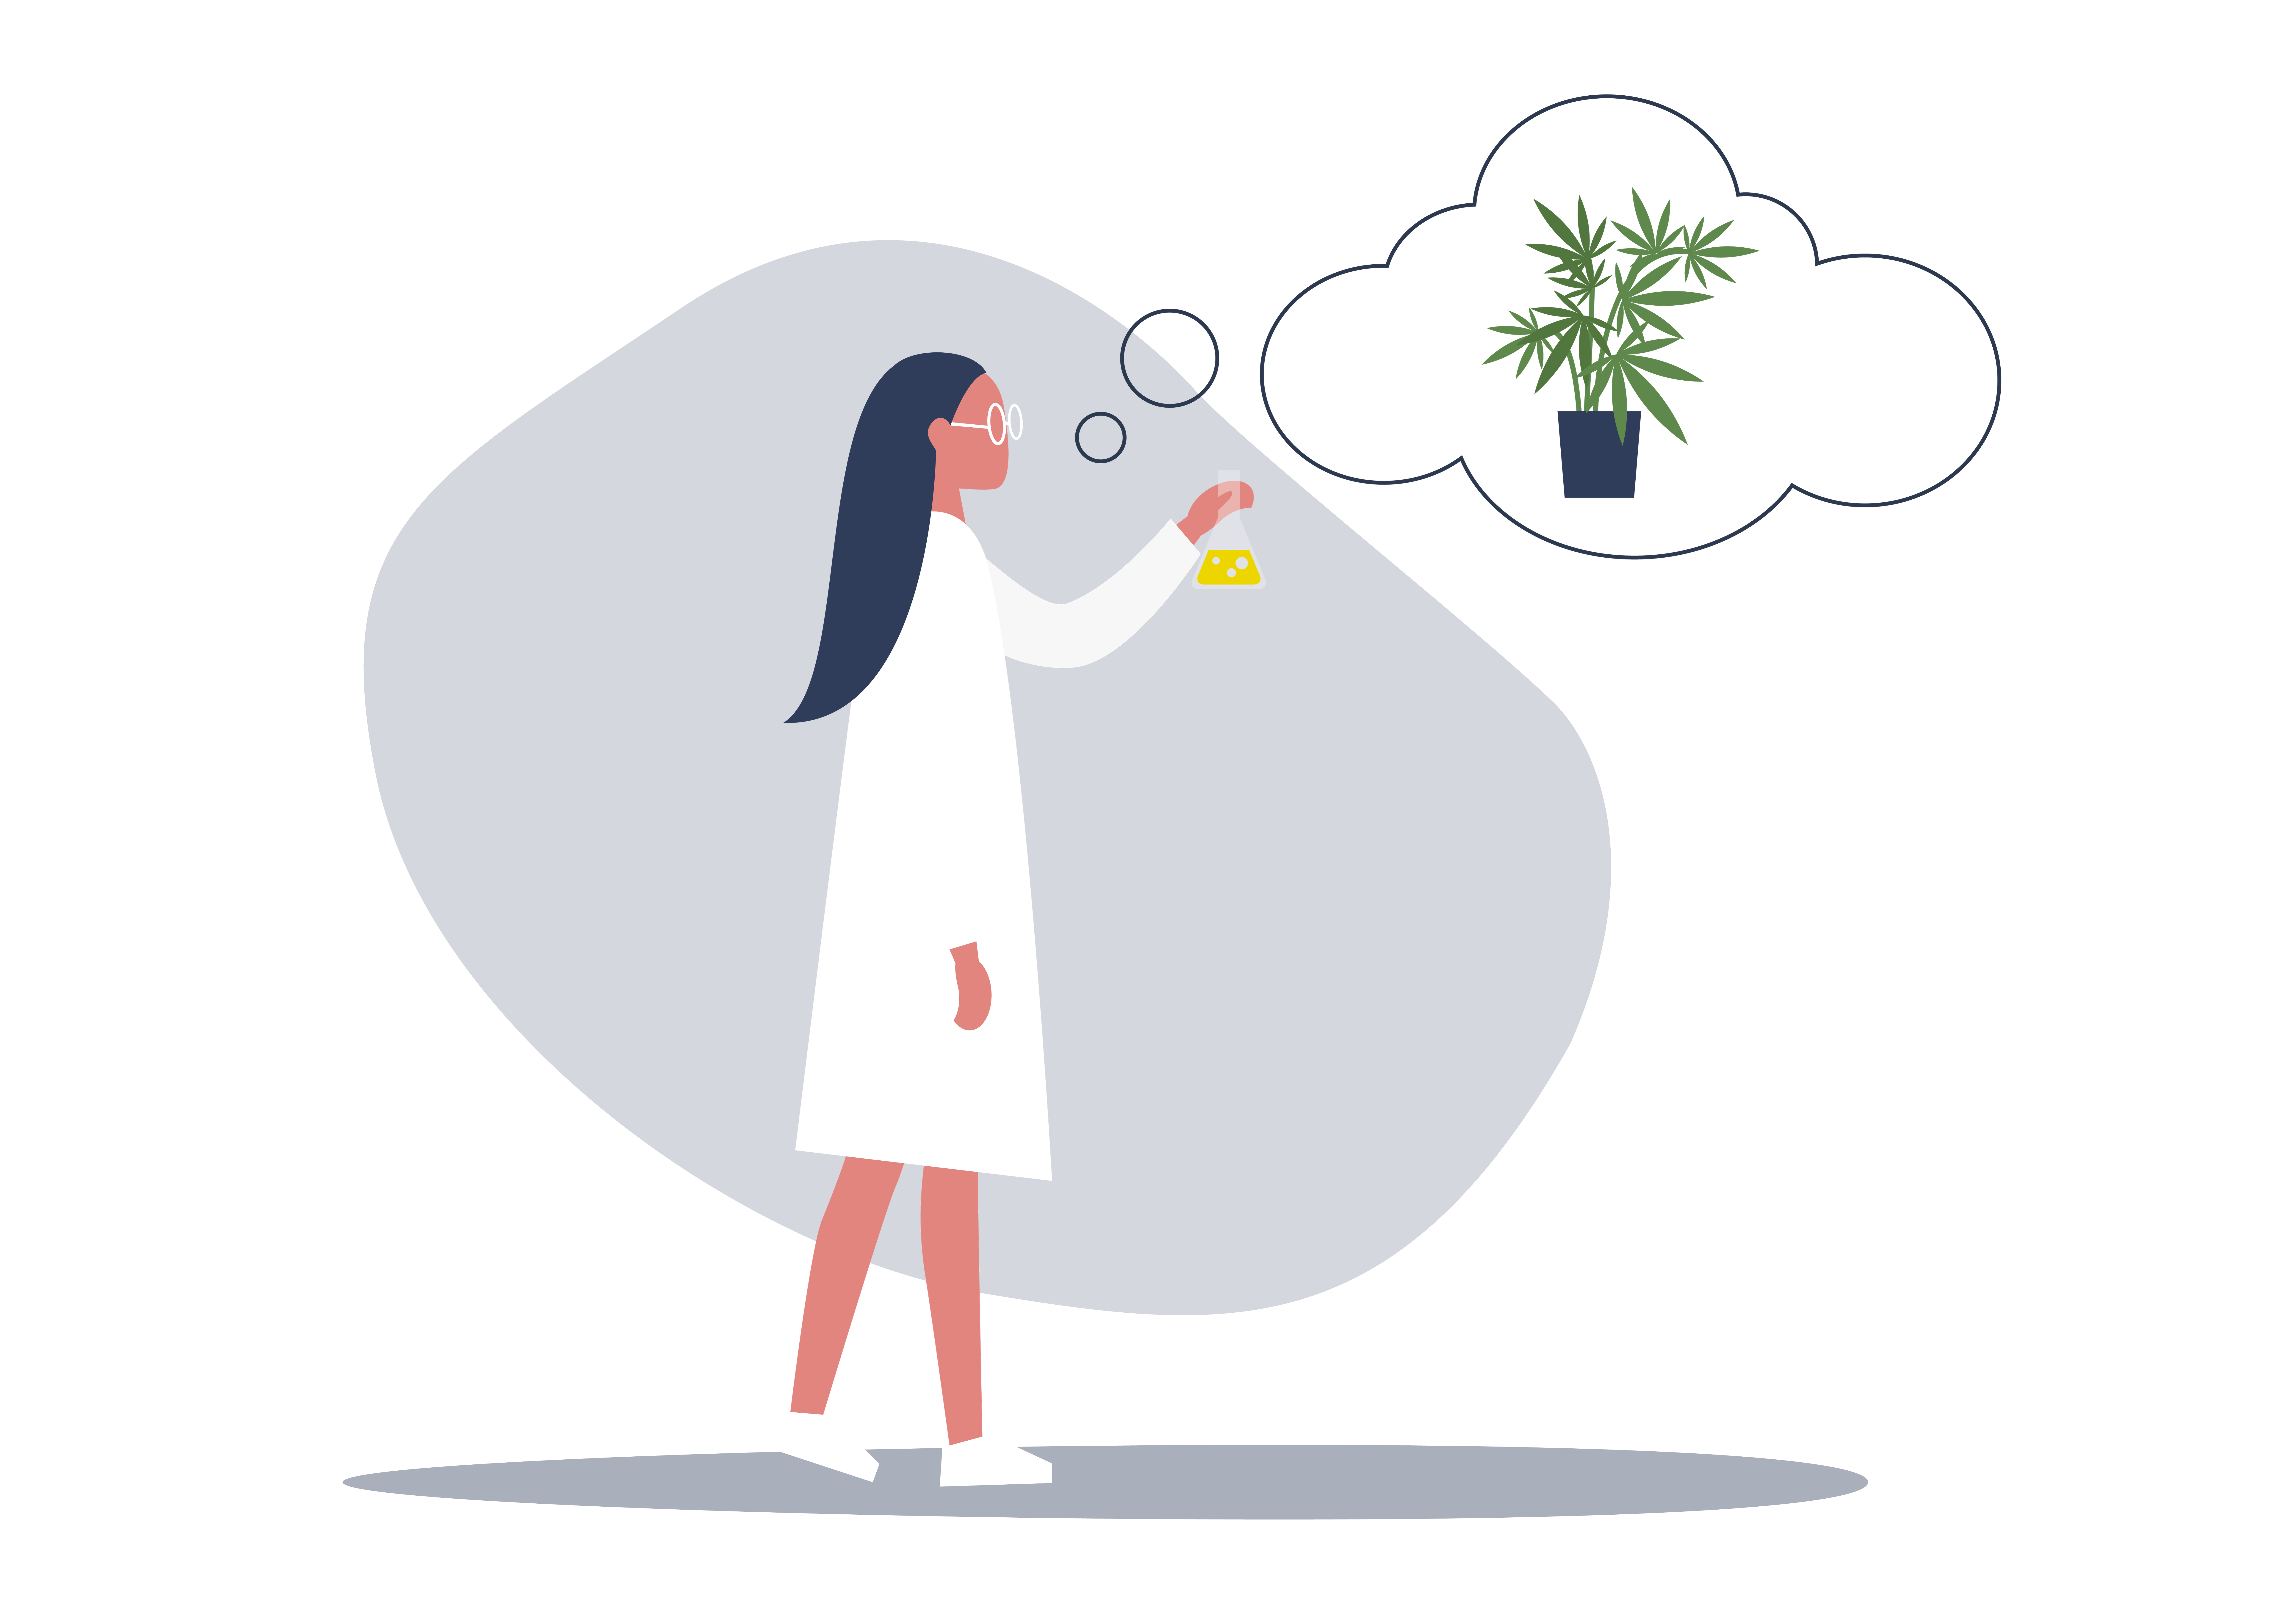 Cartoon Scientist with Hemp Plant thought bubble